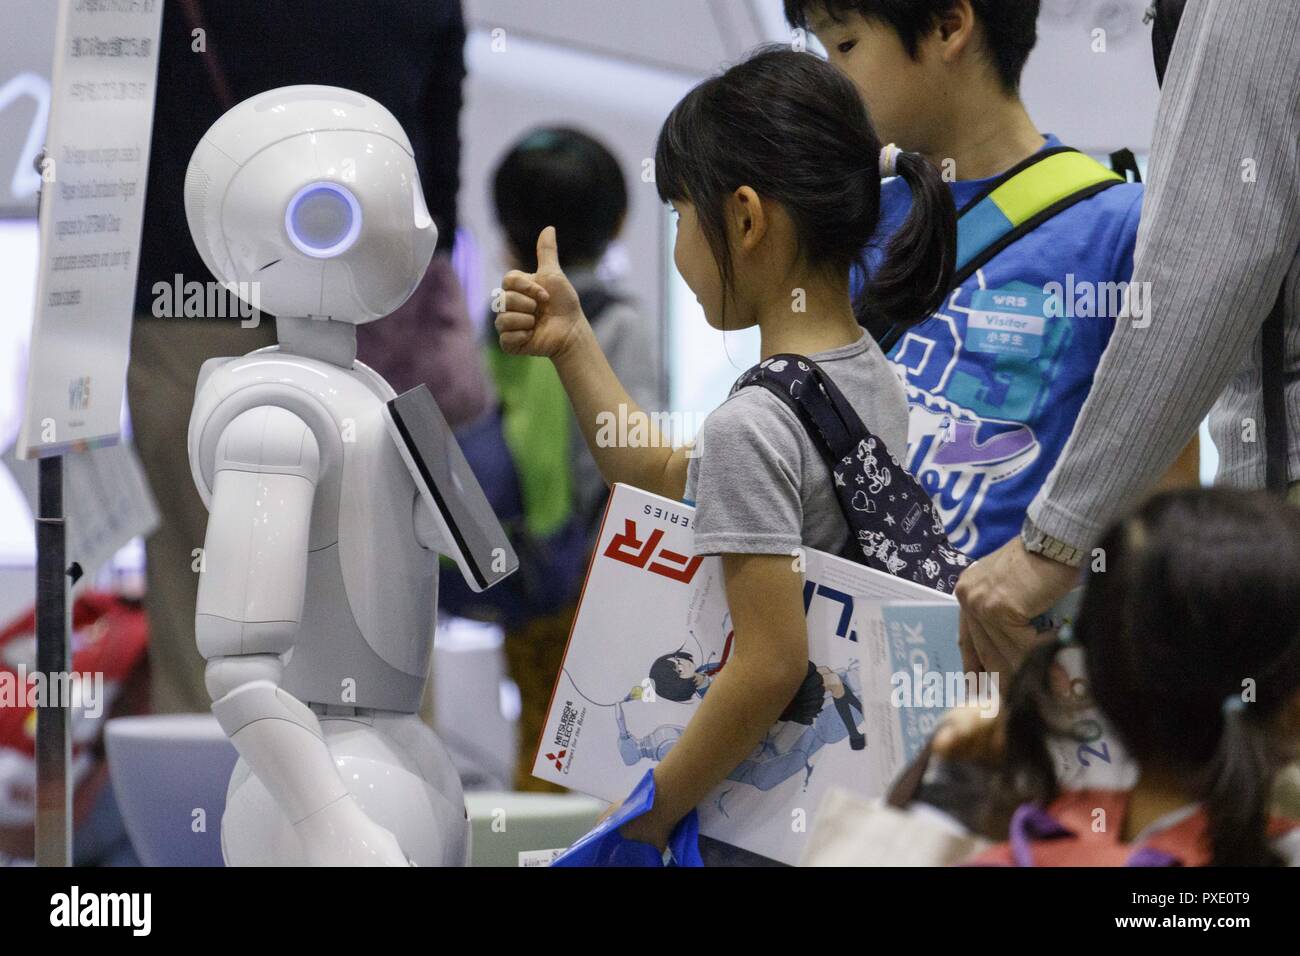 Tokyo, Japan. 21st Oct, A girl greets a humanoid robot Pepper during the World Robot 2018 in Tokyo Big Sight. The showcases the latest technology robots in fields like